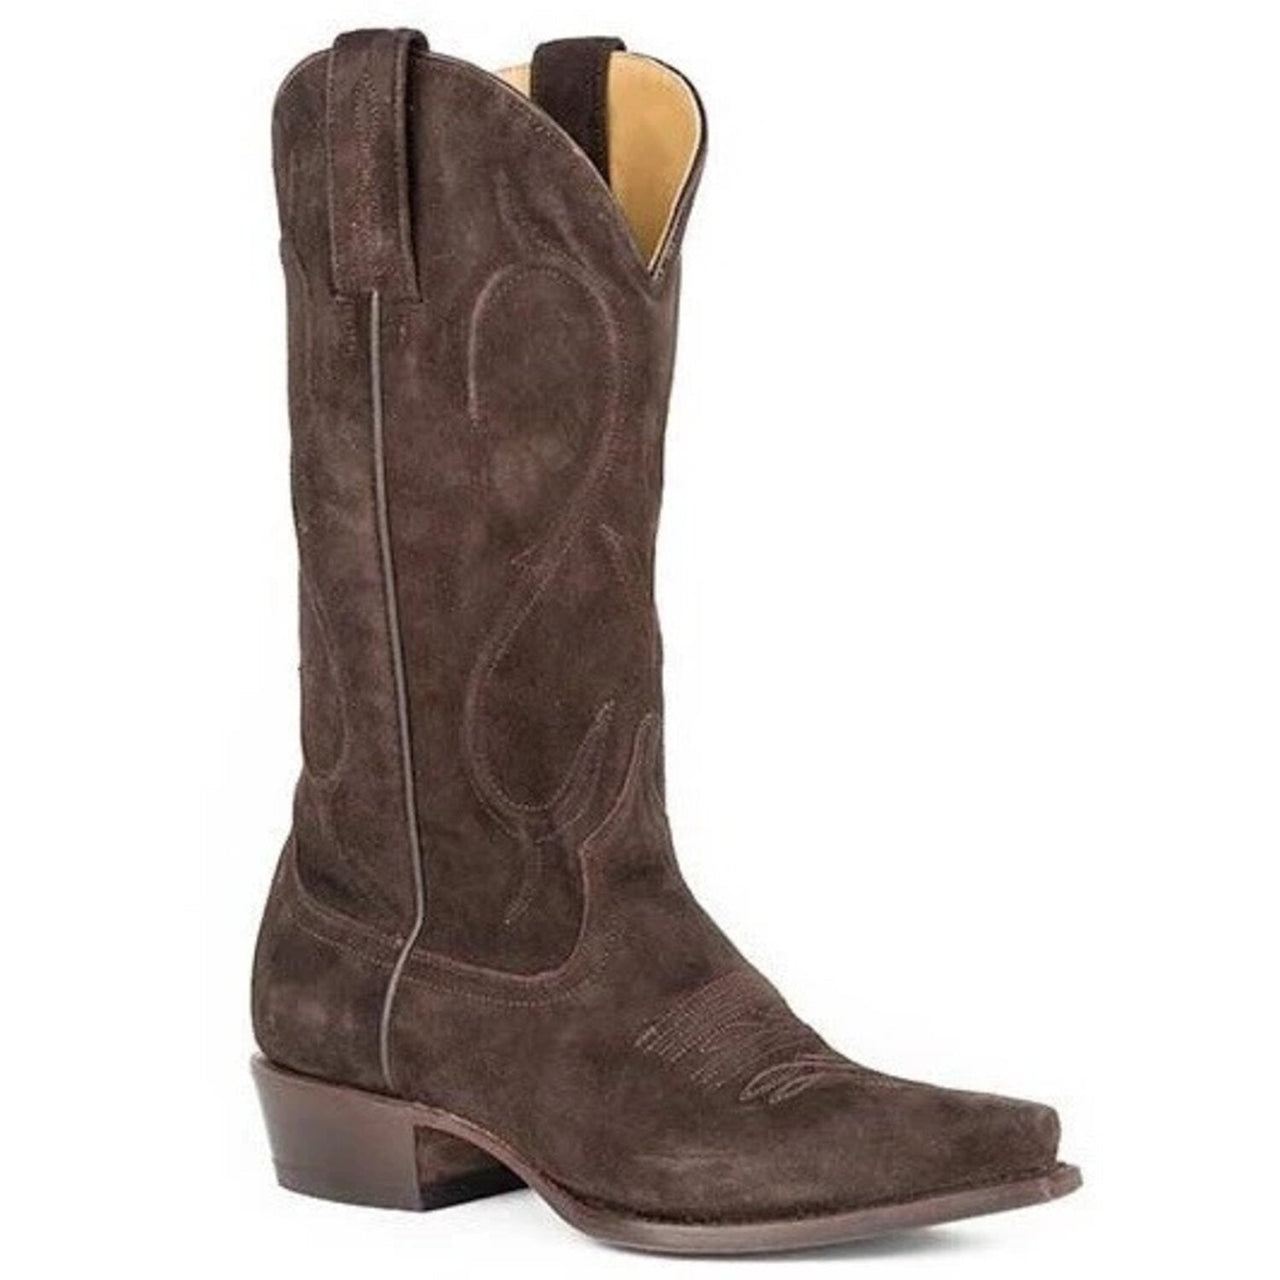 Women's Stetson Reagan Boots Snip Toe Handcrafted Brown - yeehawcowboy